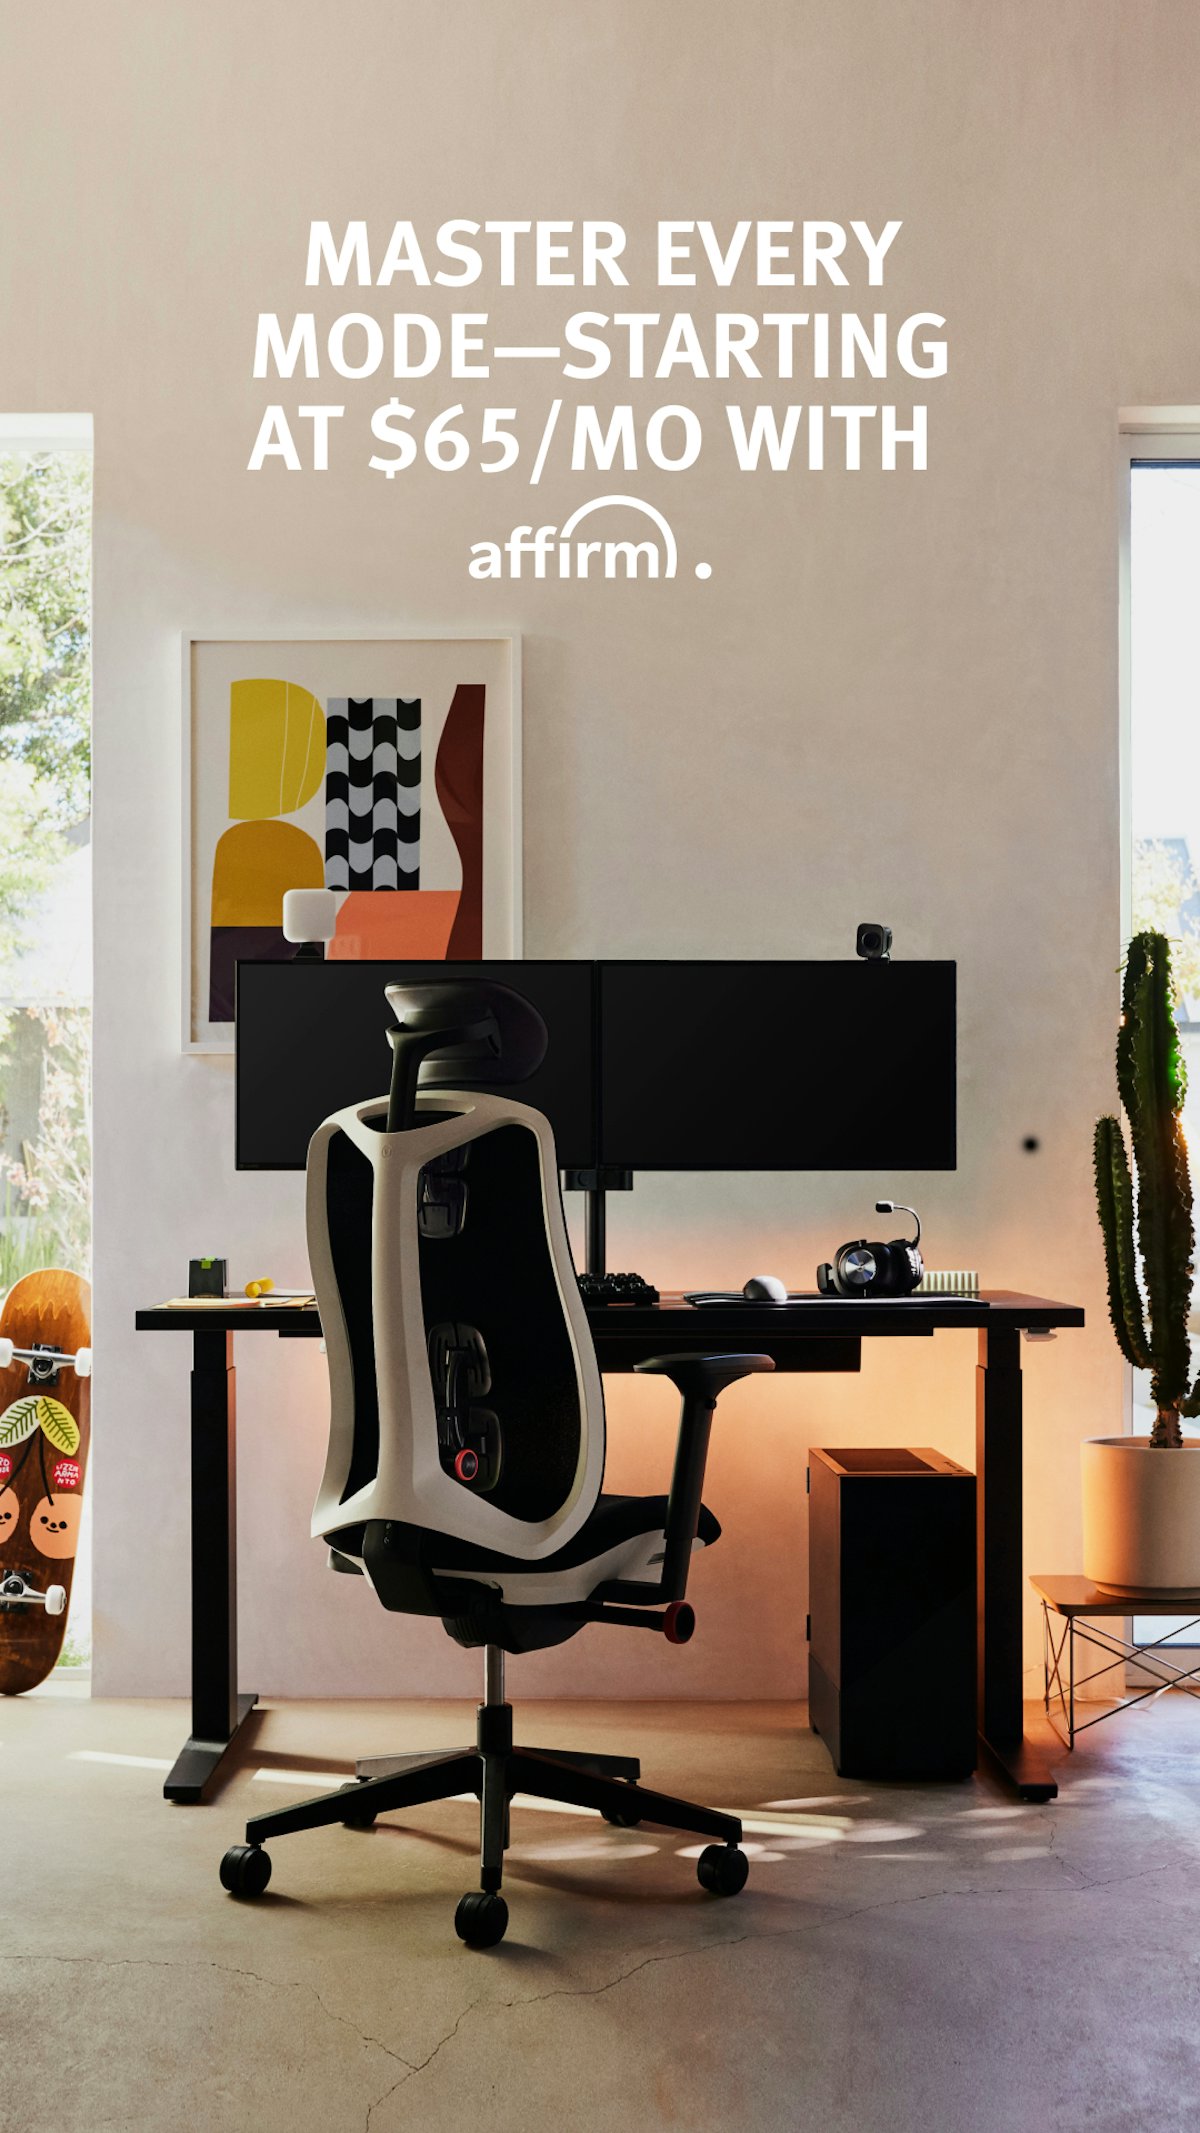 Affirm for Vantum Gaming Chair